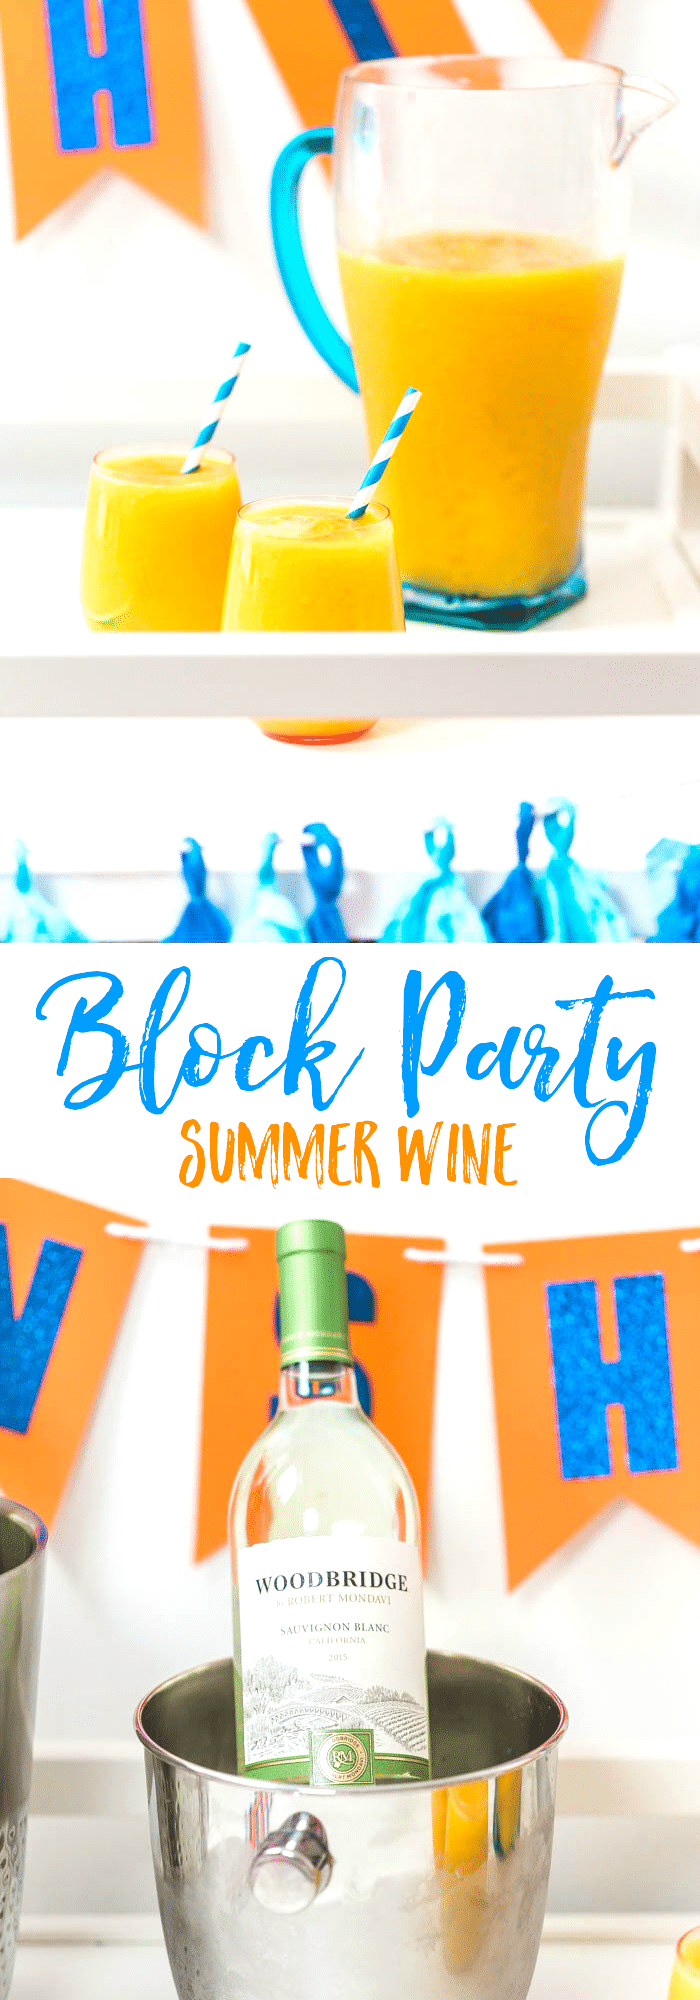 Summer Wine Block Party + Mango Lime Wine Slush Cocktail Drink Recipe - Hello Sunshine Banner and other party decorations